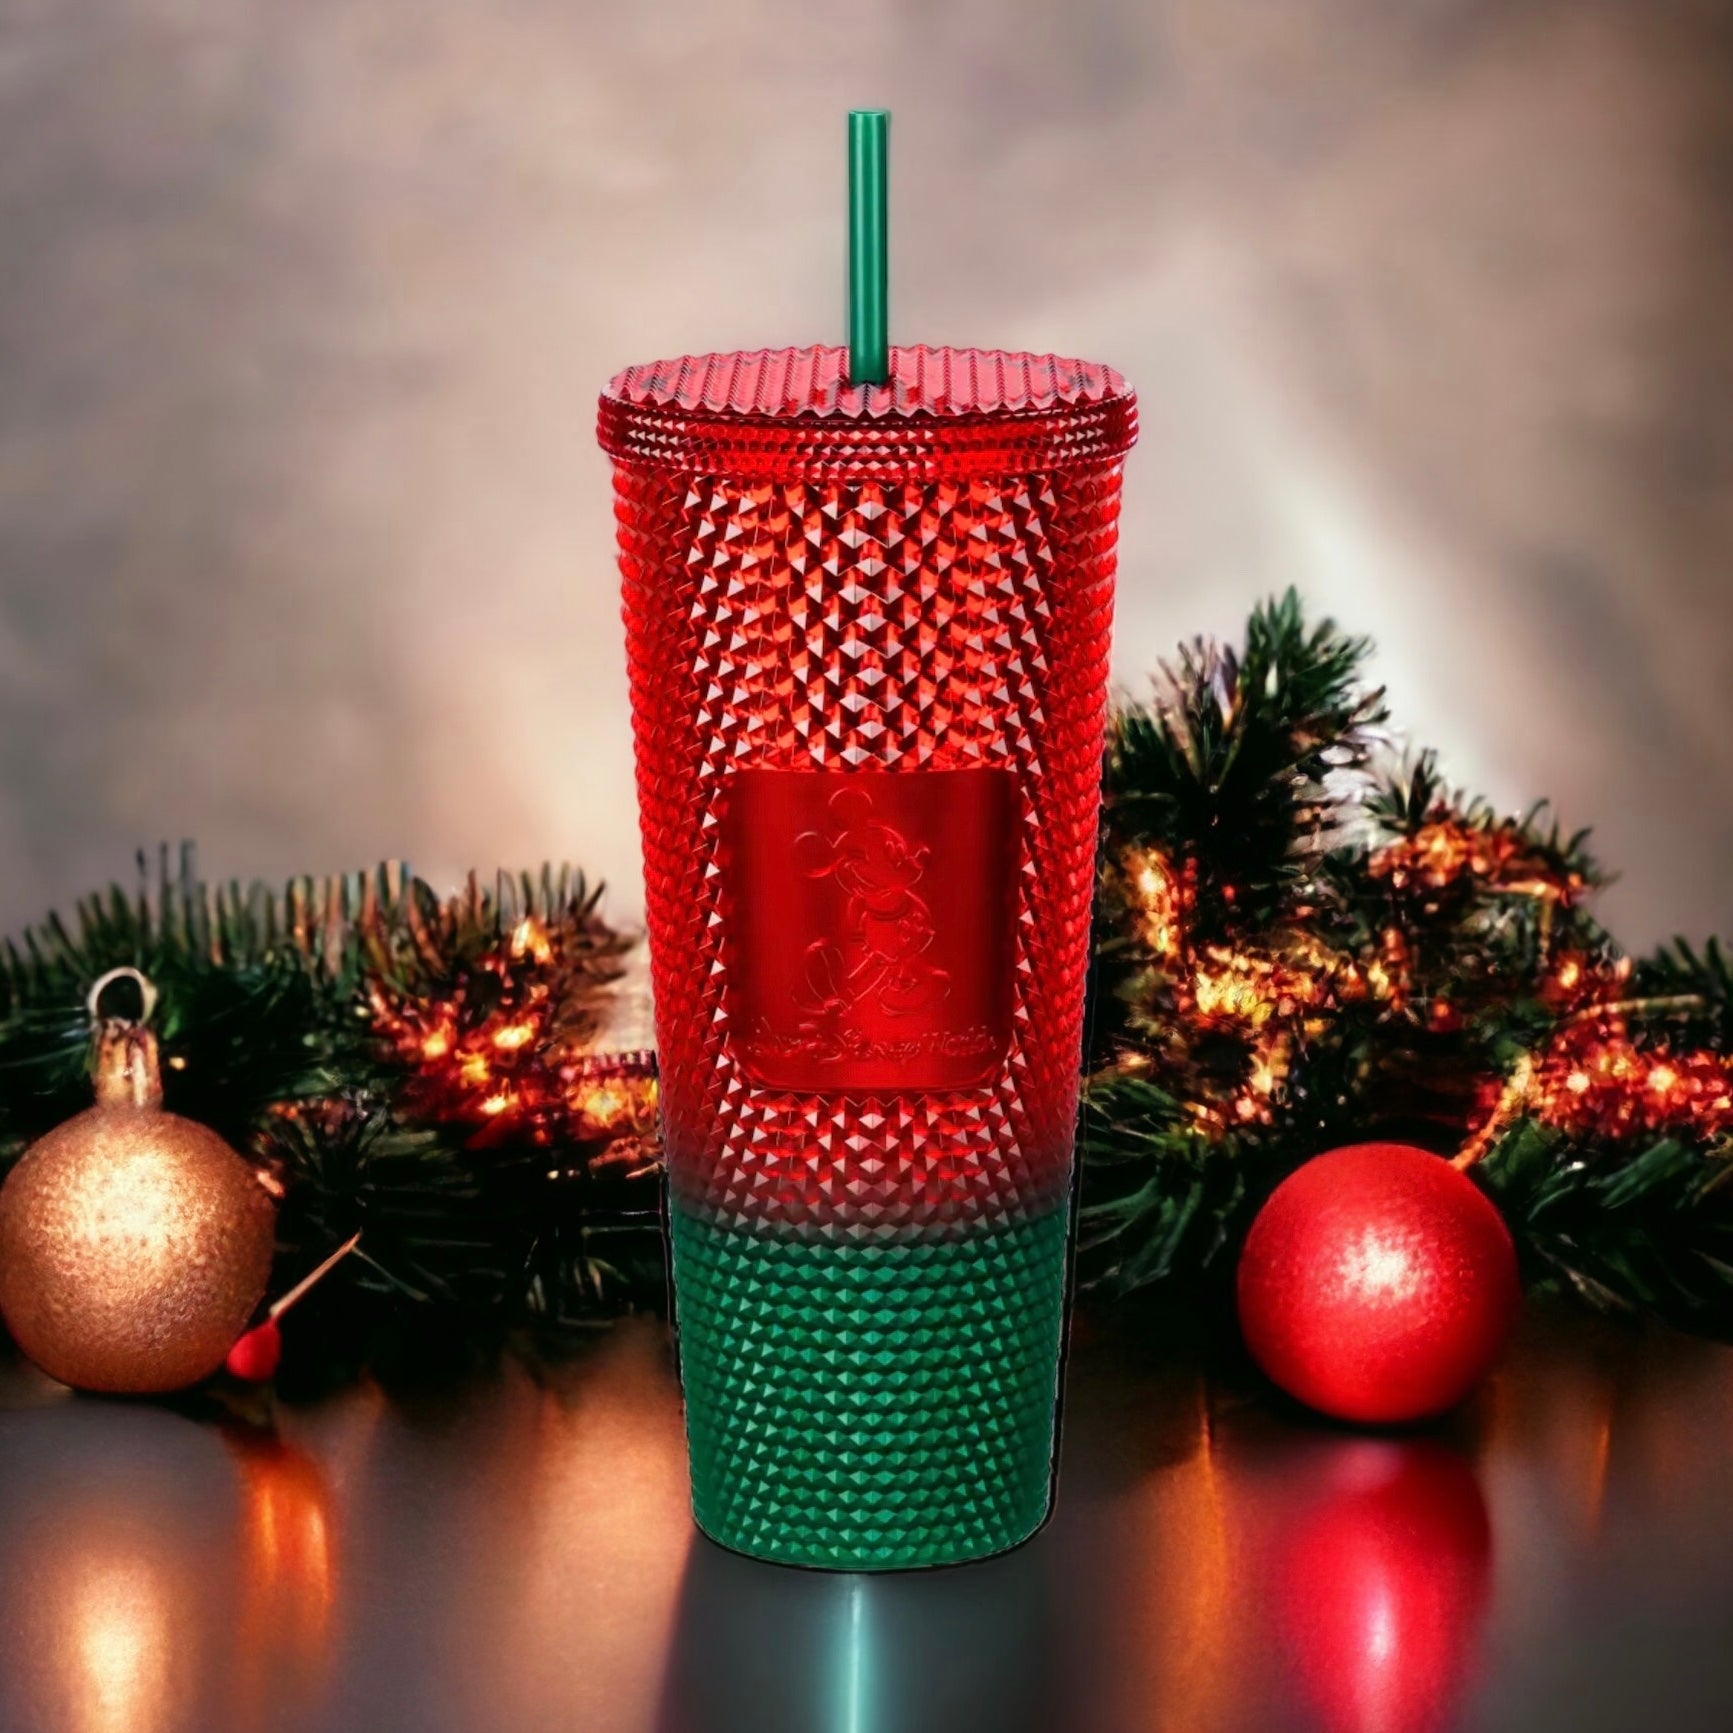 Disney Christmas Straw toppers are available. Decorate your Stanley tumbler  with the magic of Christmas. 🎄 #disney #disneychristmas…